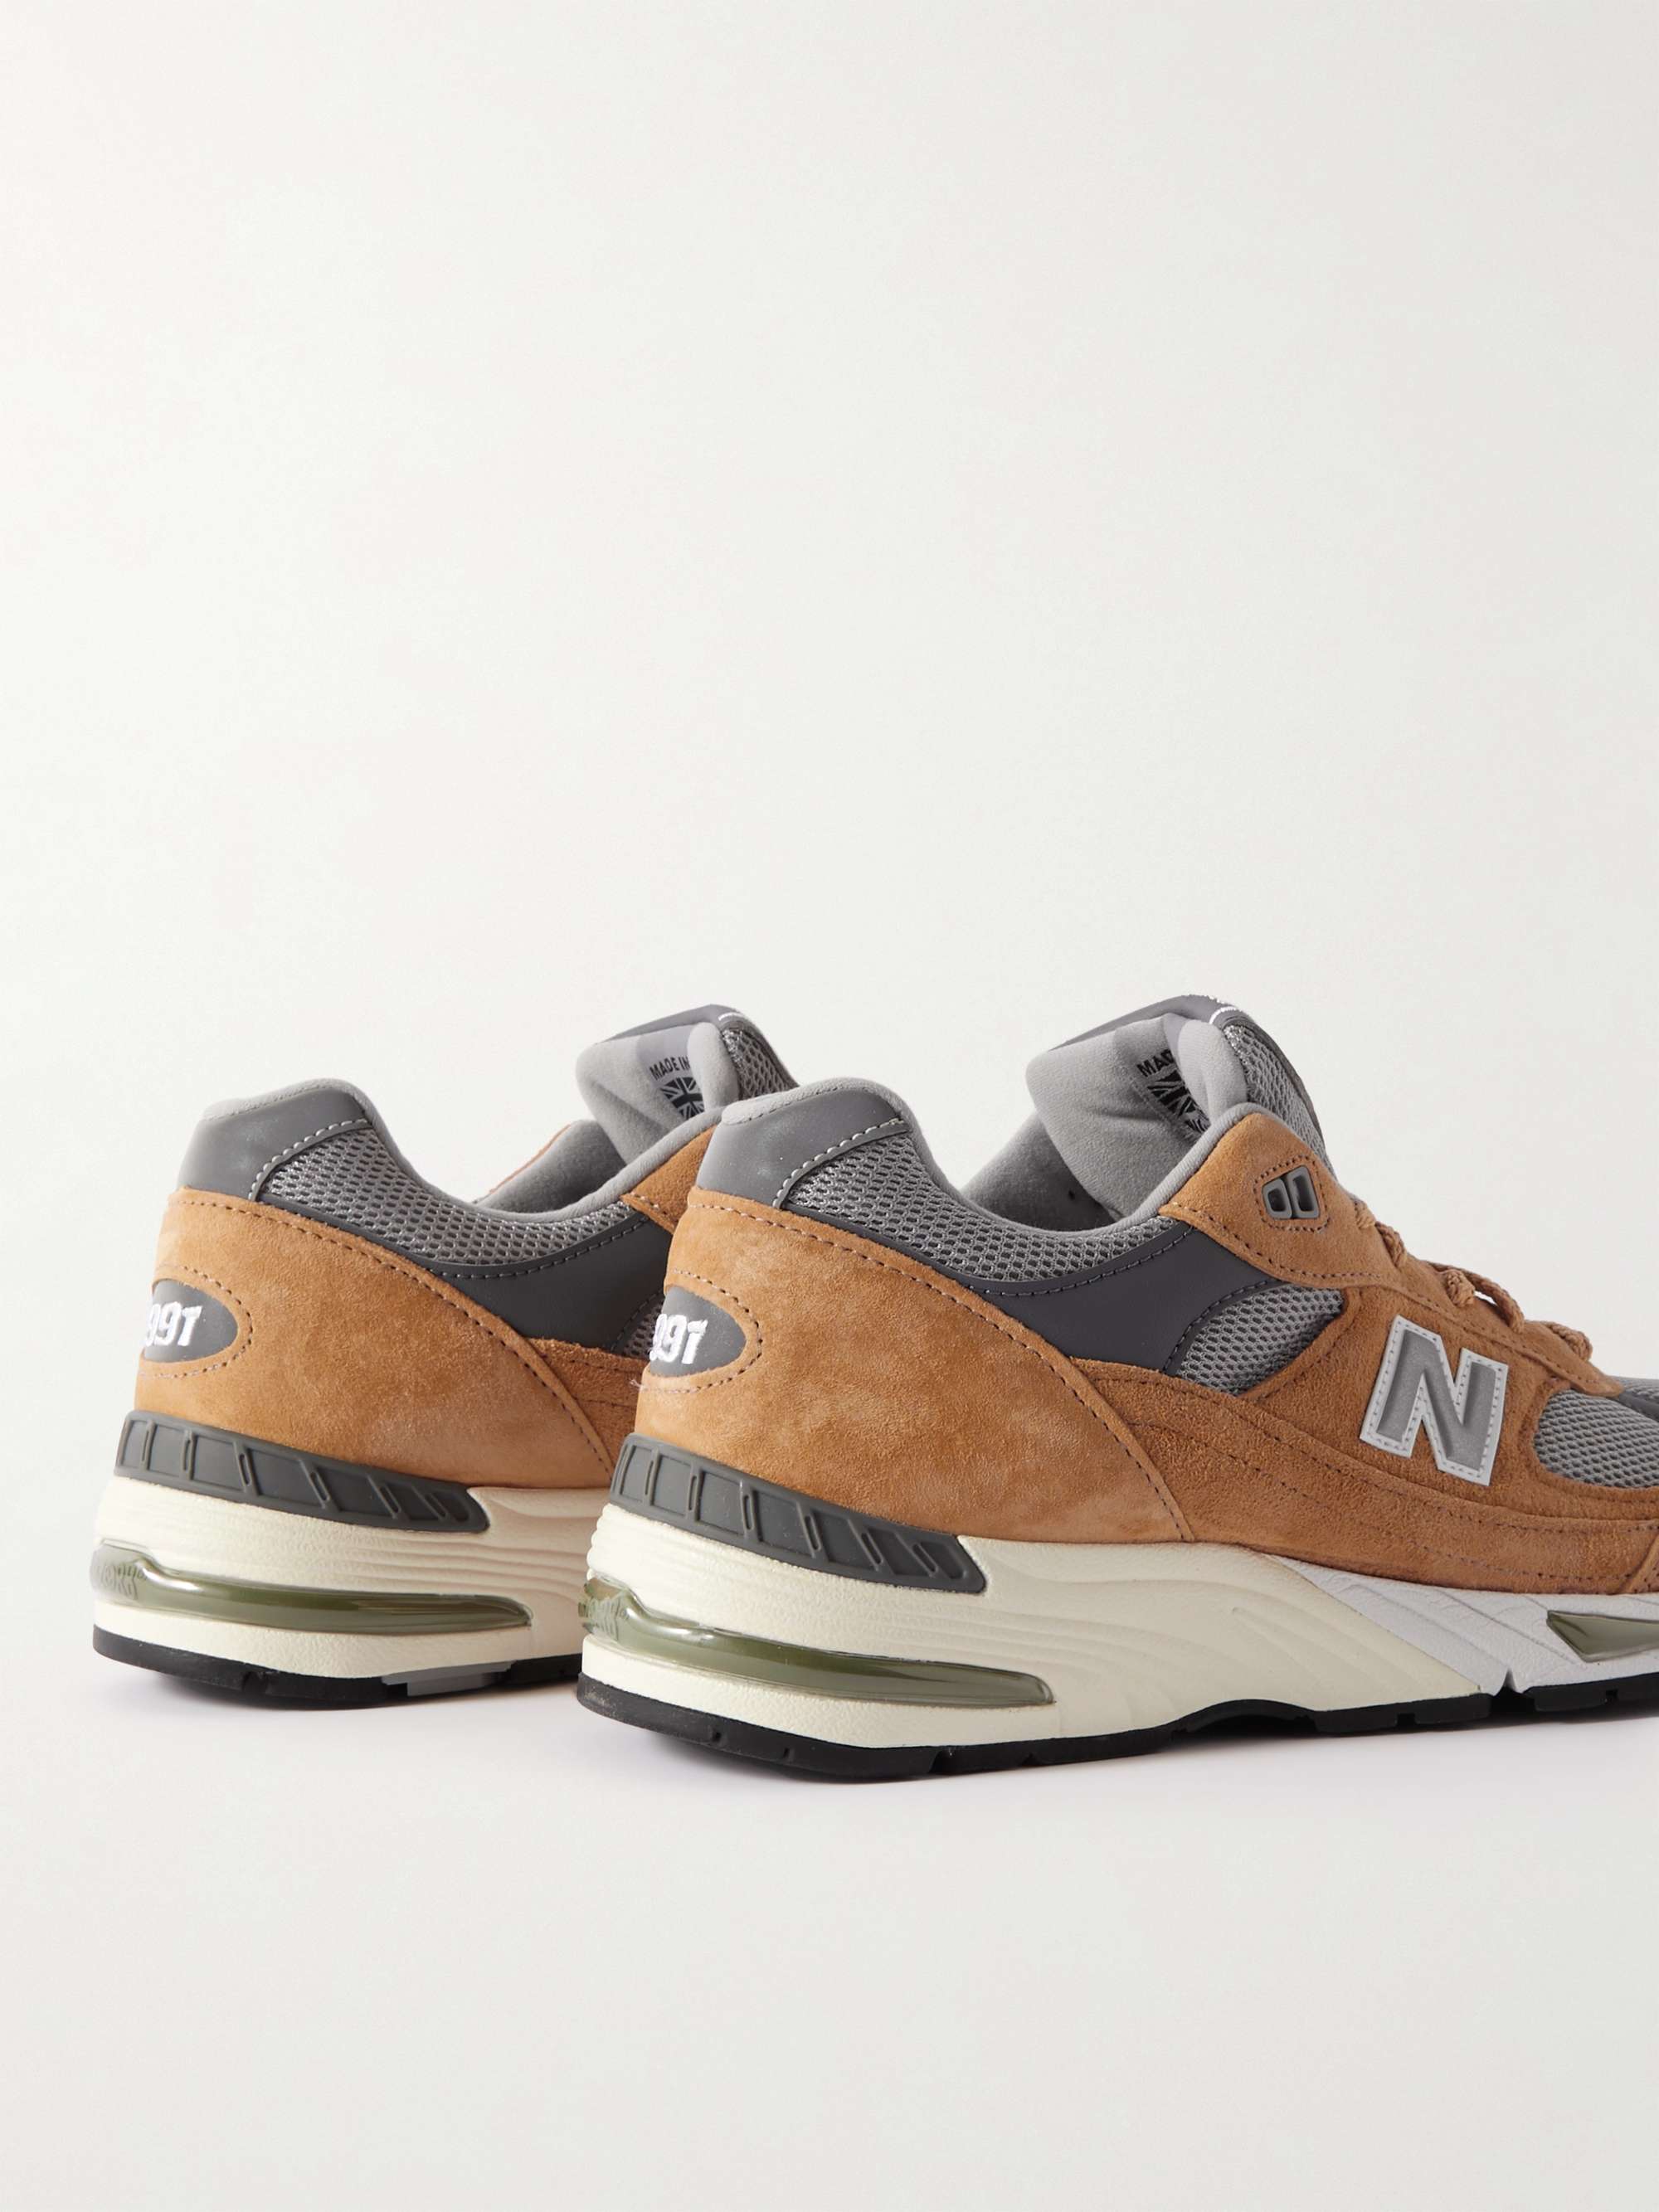 NEW BALANCE MiUK 991 Suede, Mesh and Leather Sneakers | MR PORTER